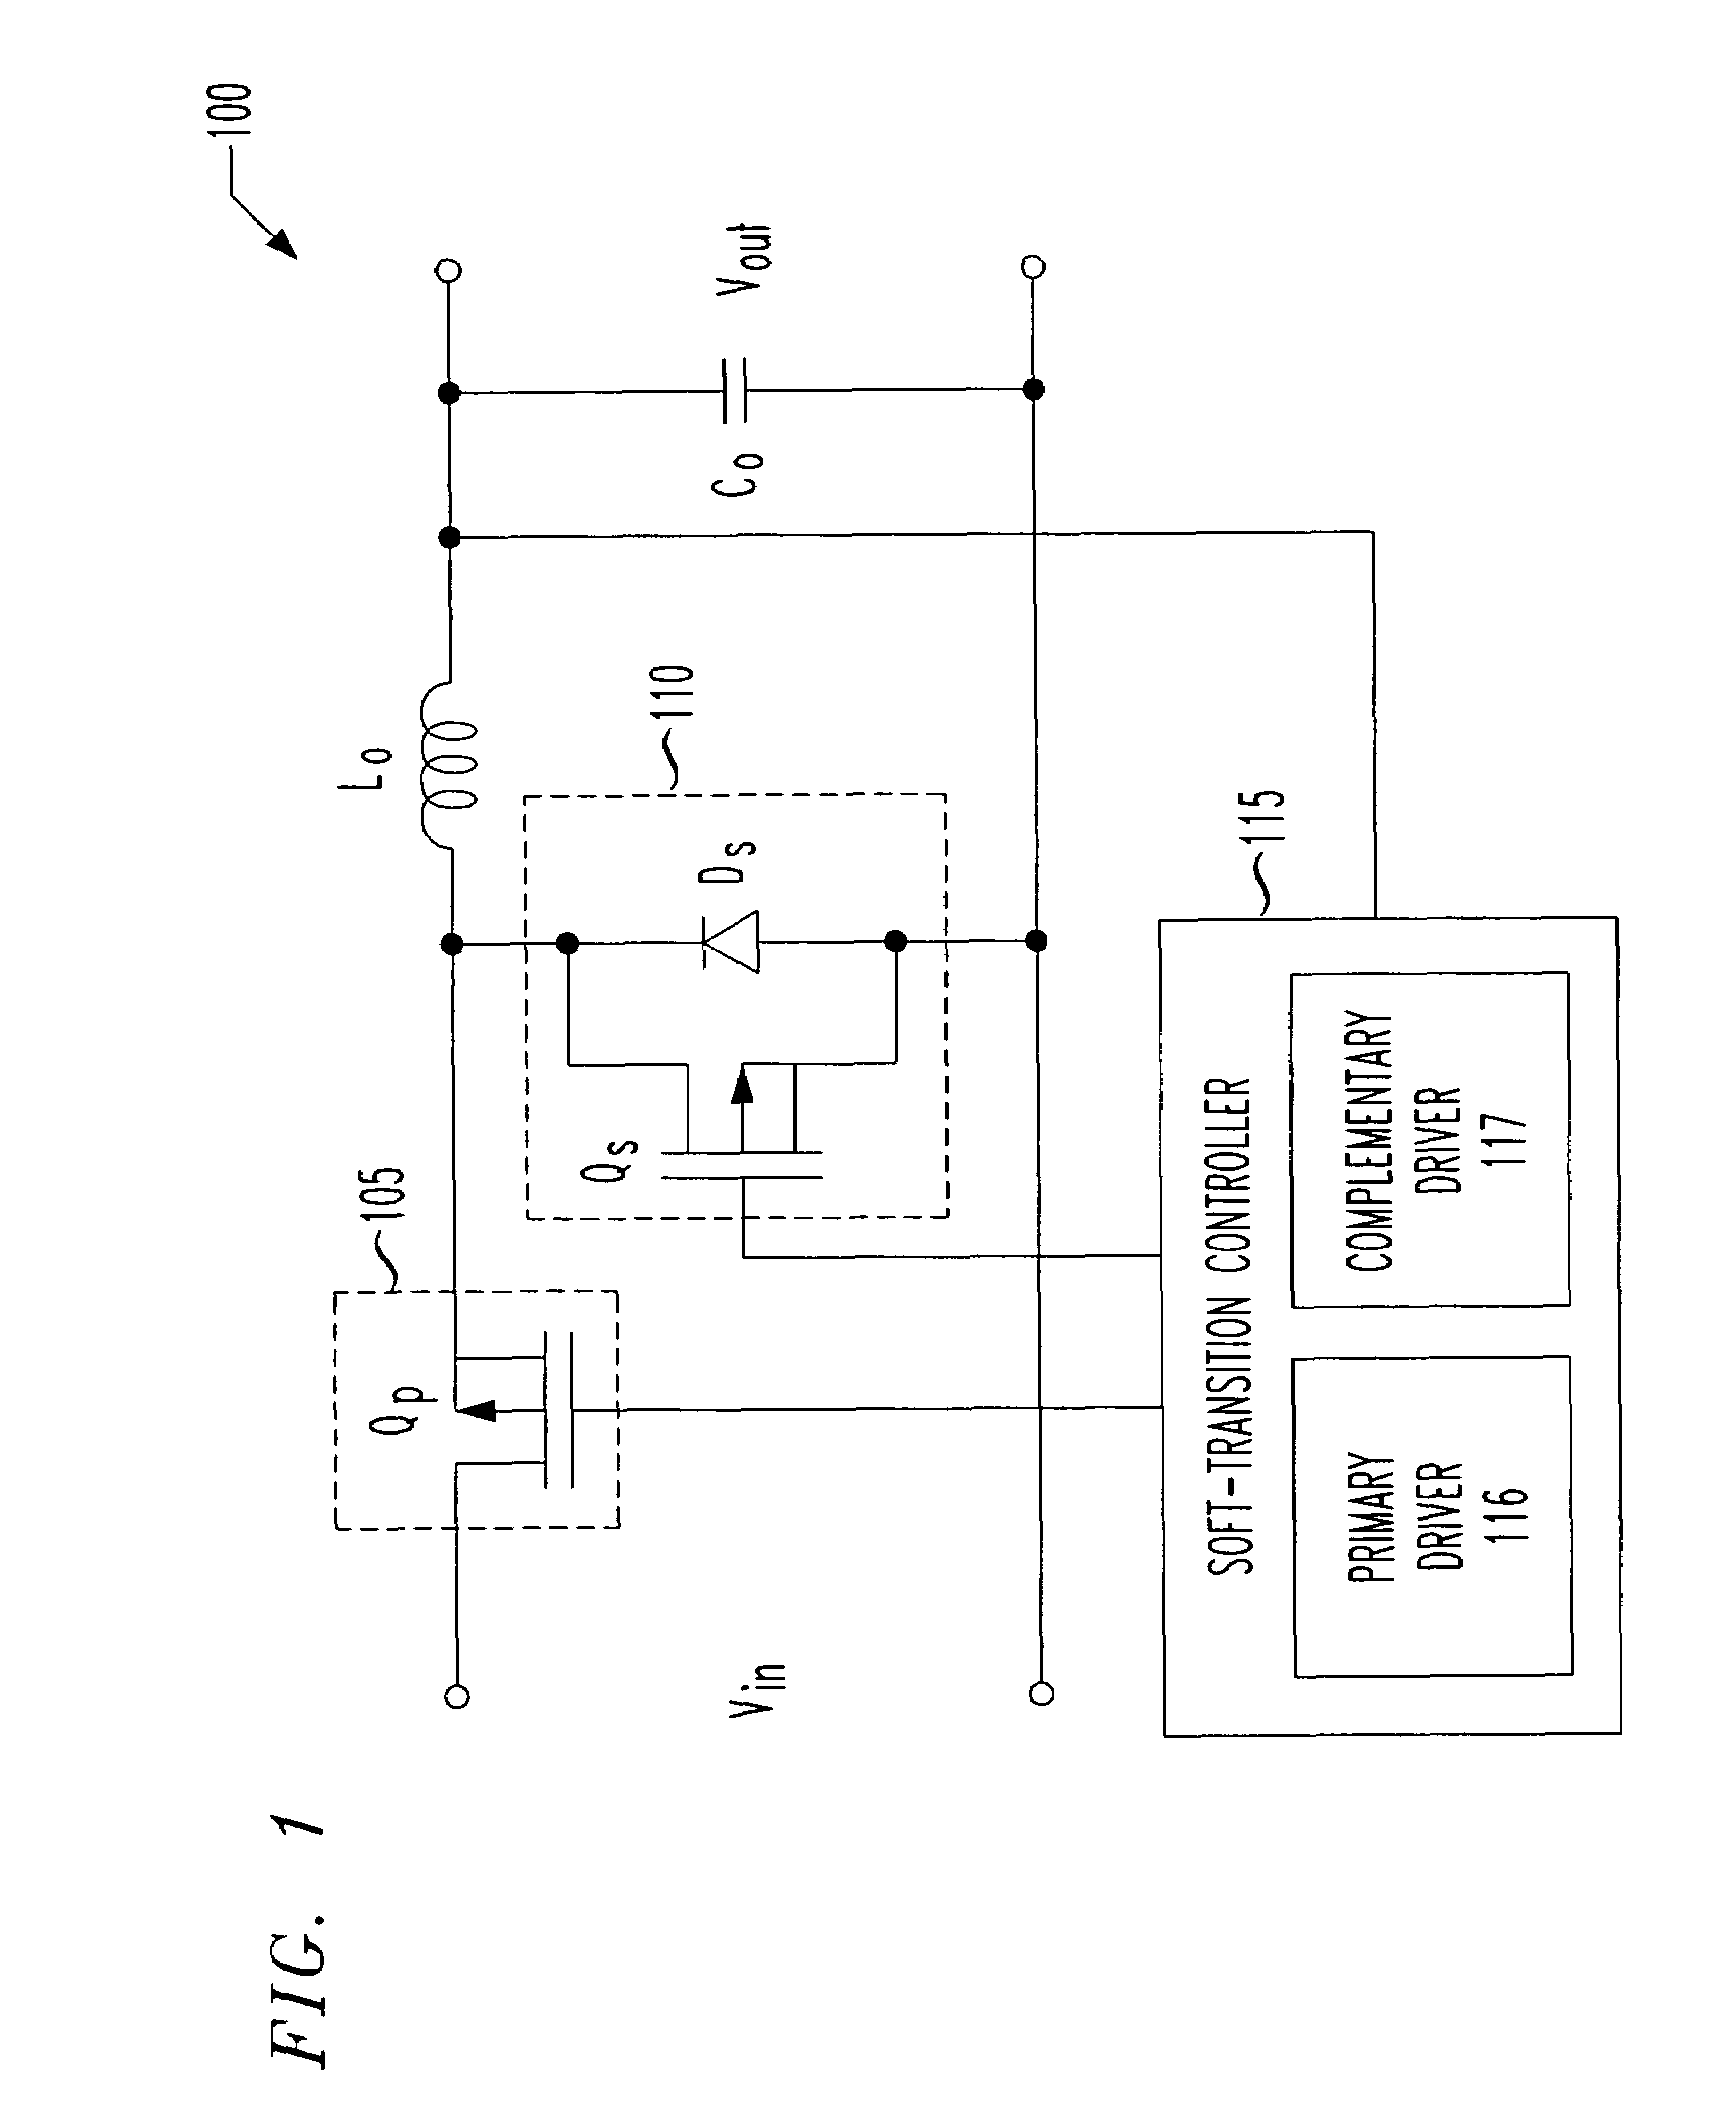 Soft-transition controller of a synchronous converter